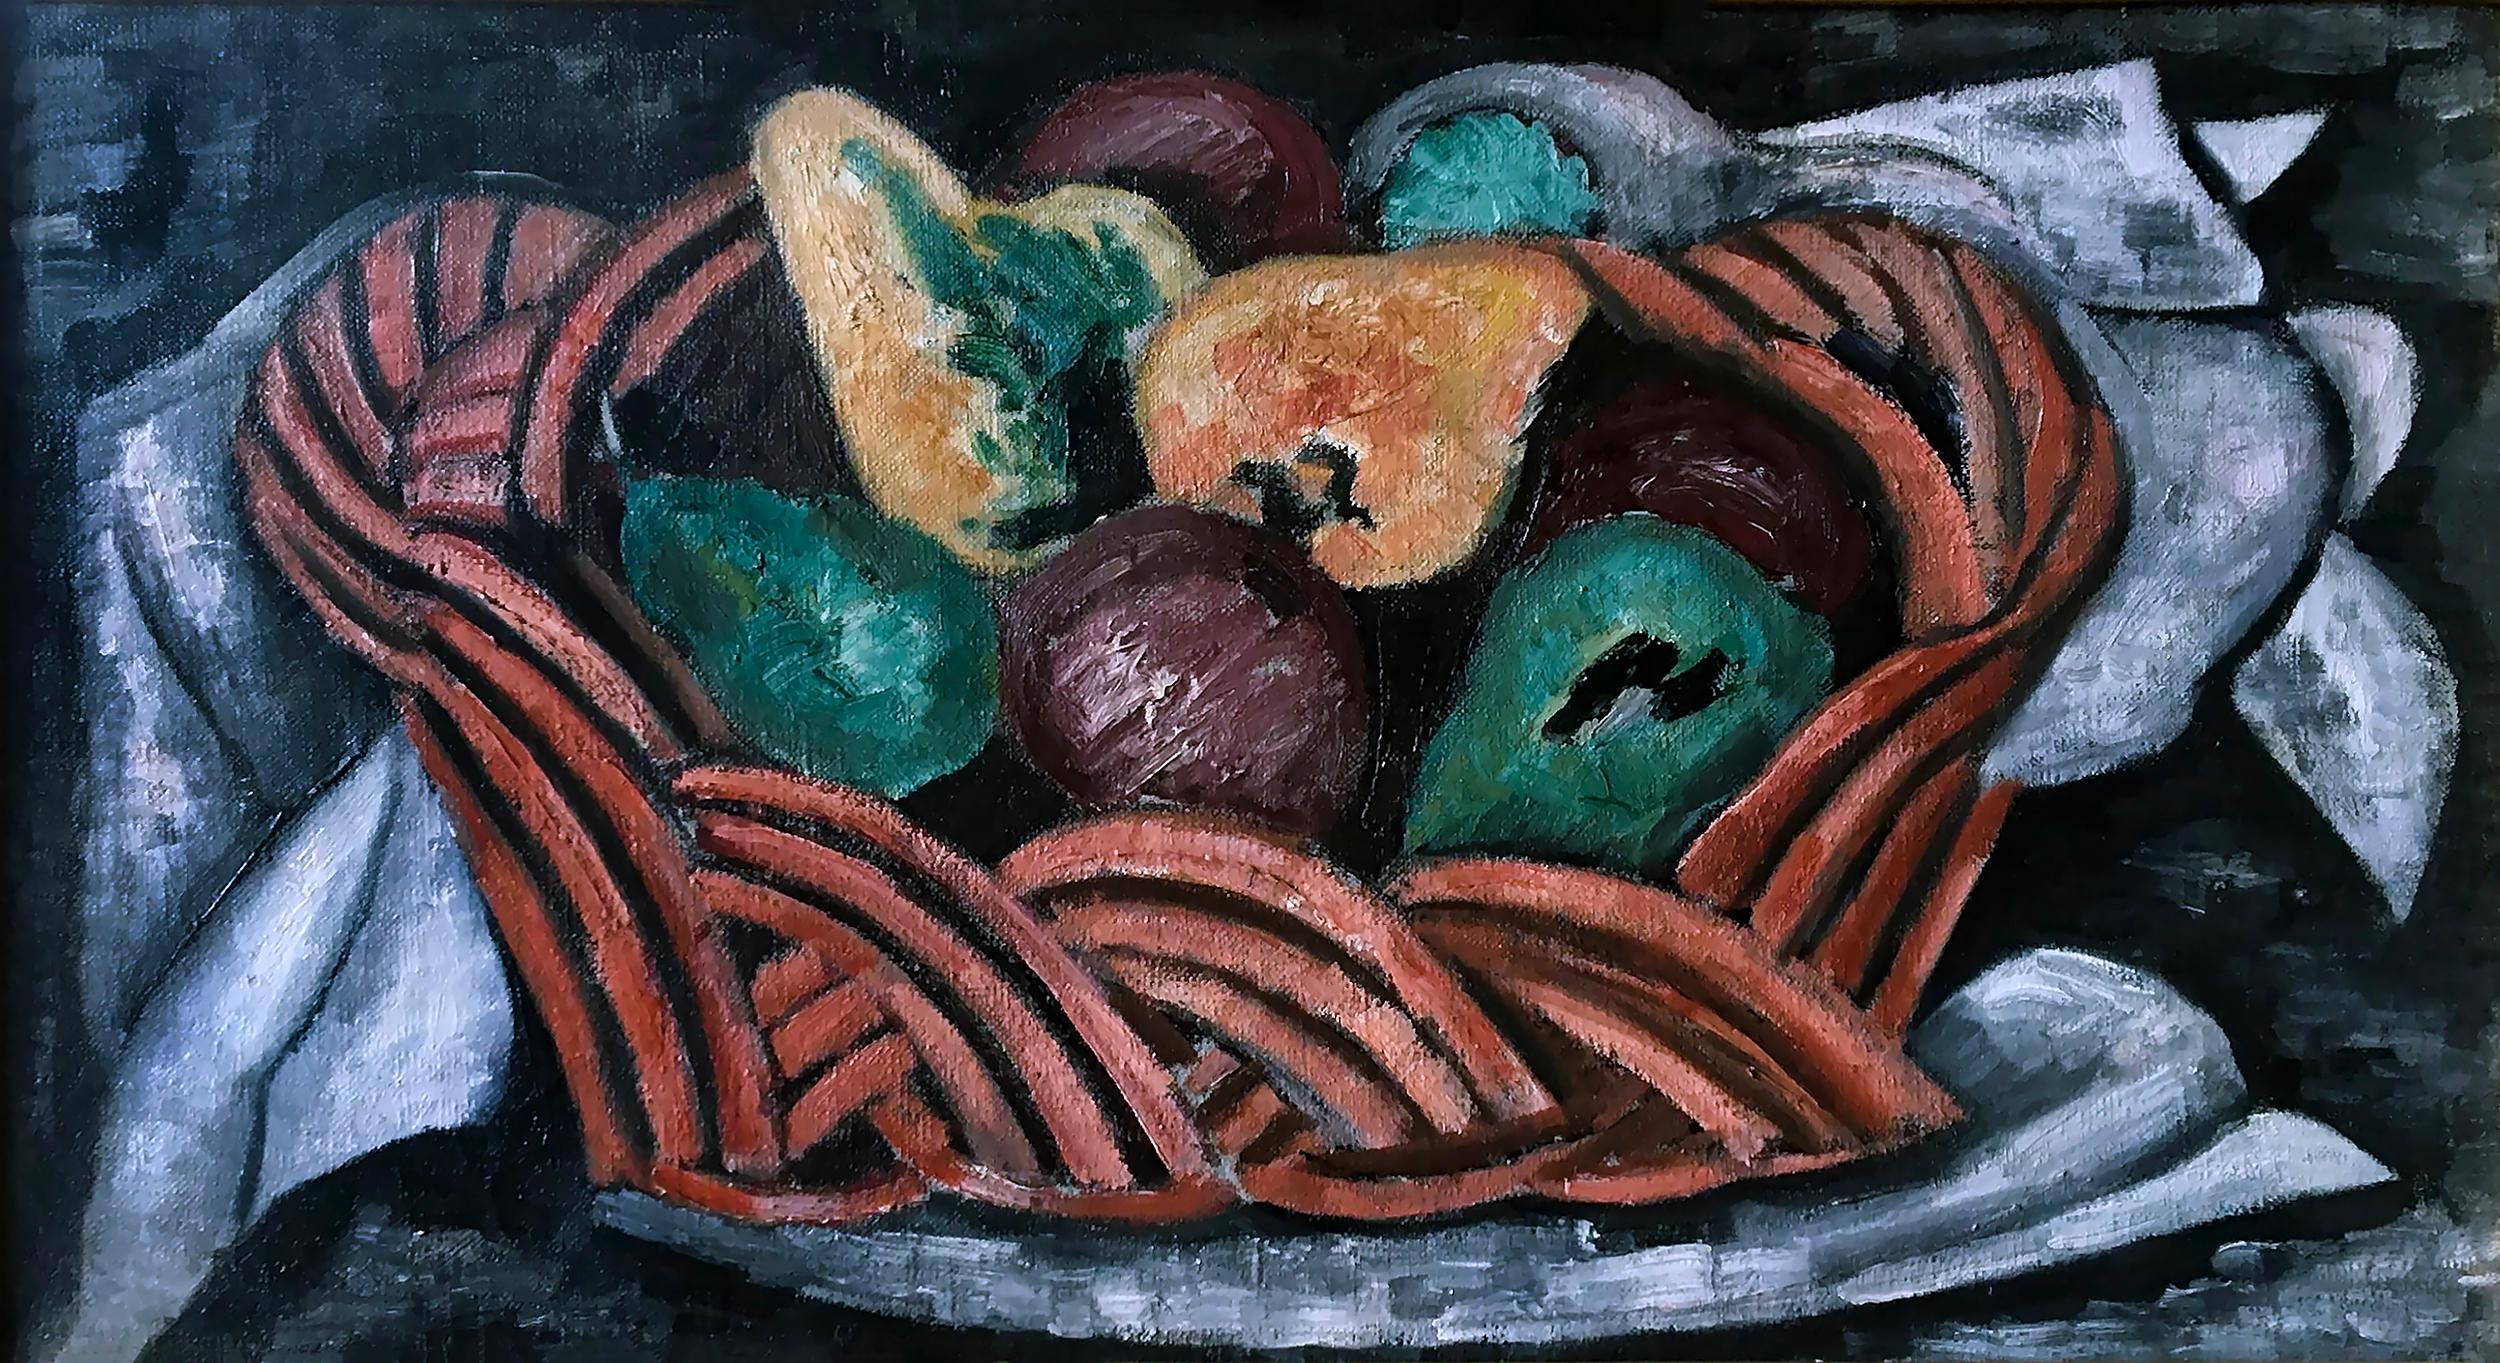 Marsden Hartley Interior Painting - Basket with Fruit